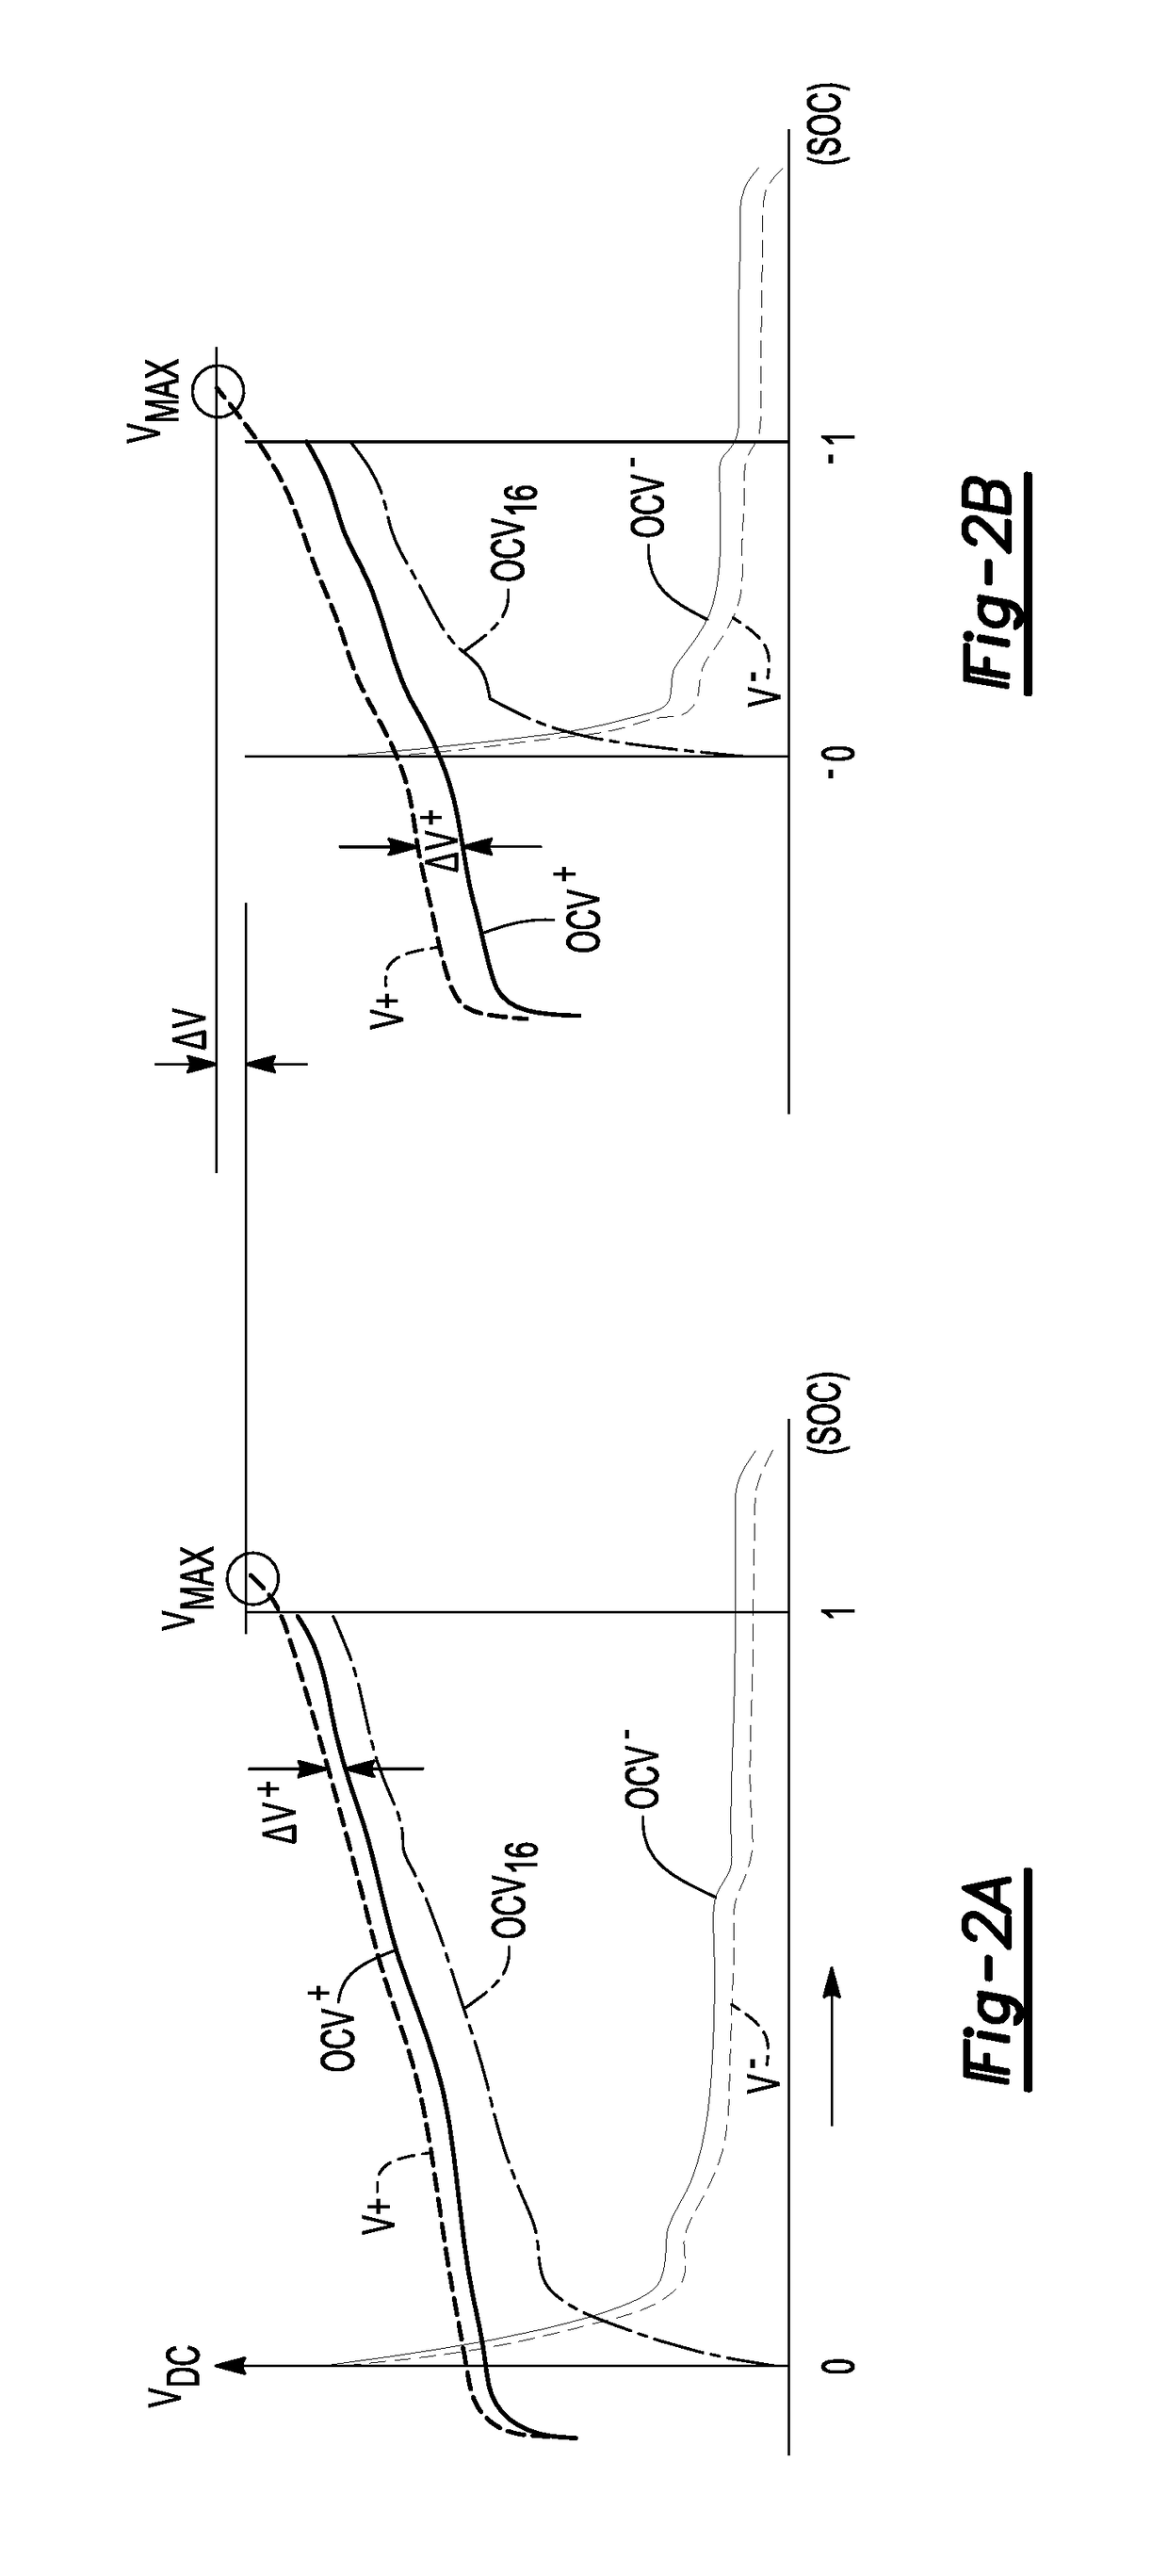 Avoidance of electrode plating in a battery cell